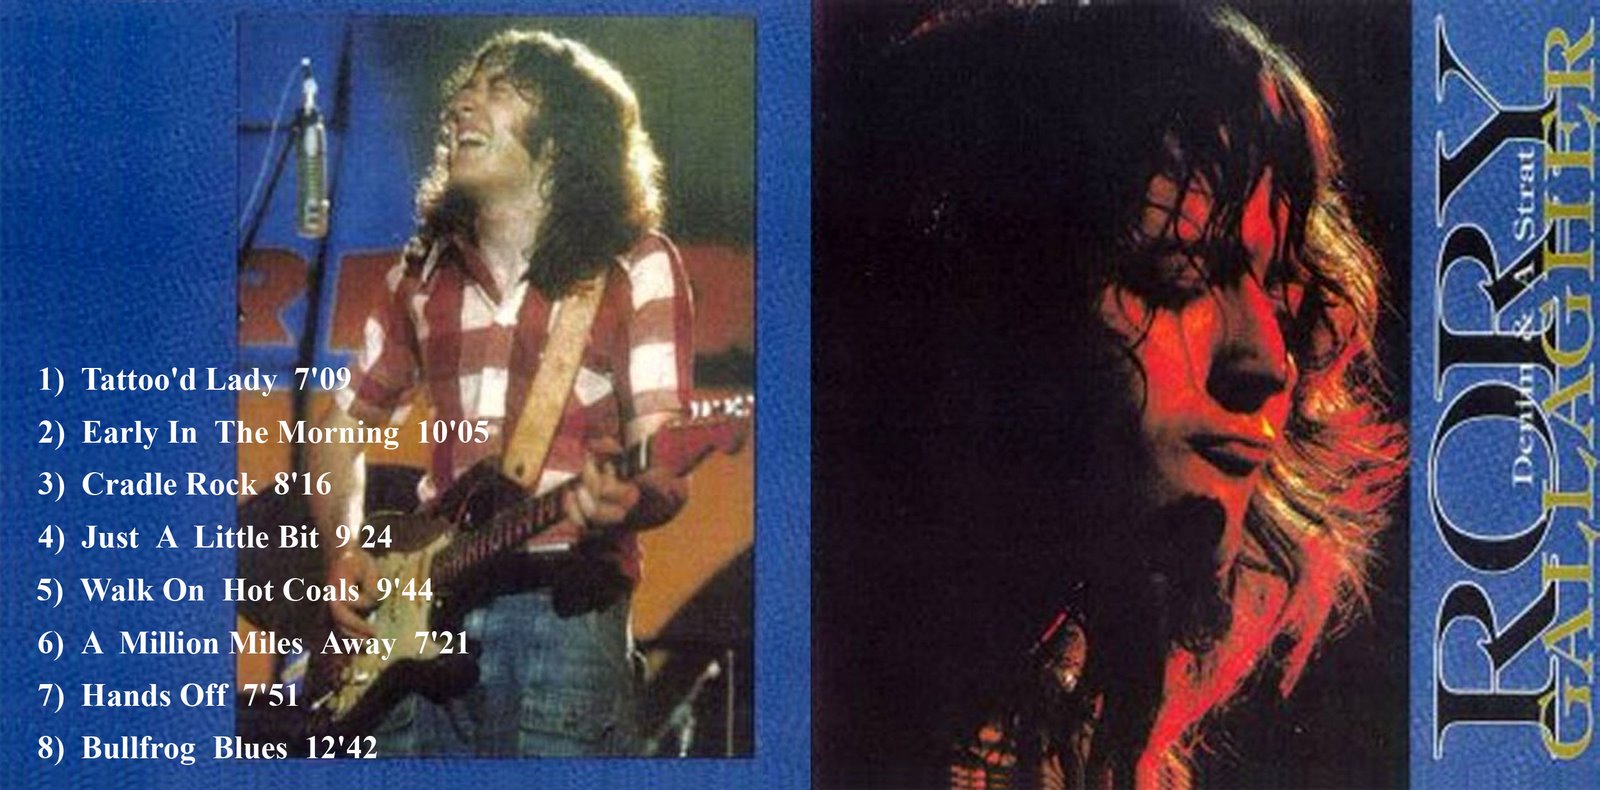 [Rory+Gallagher+-+Denim+And+A+Strat+-+face+et+intÃ©rieur.jpg]